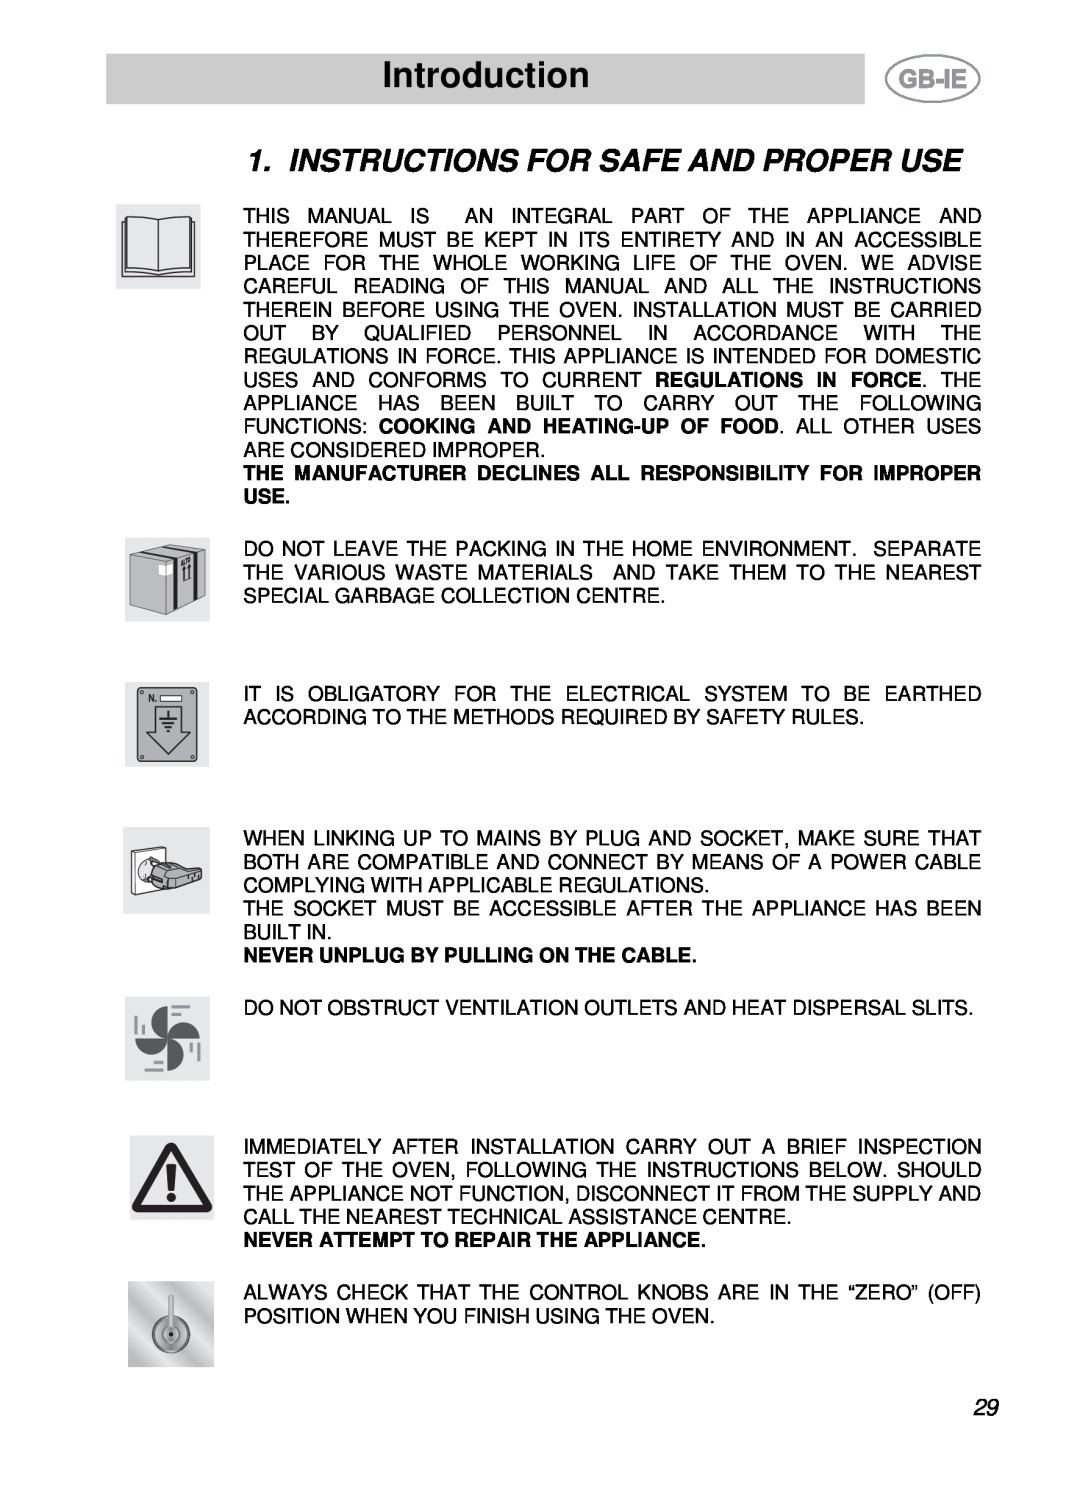 Smeg S709X-7 manual Introduction, Instructions For Safe And Proper Use, Never Unplug By Pulling On The Cable 